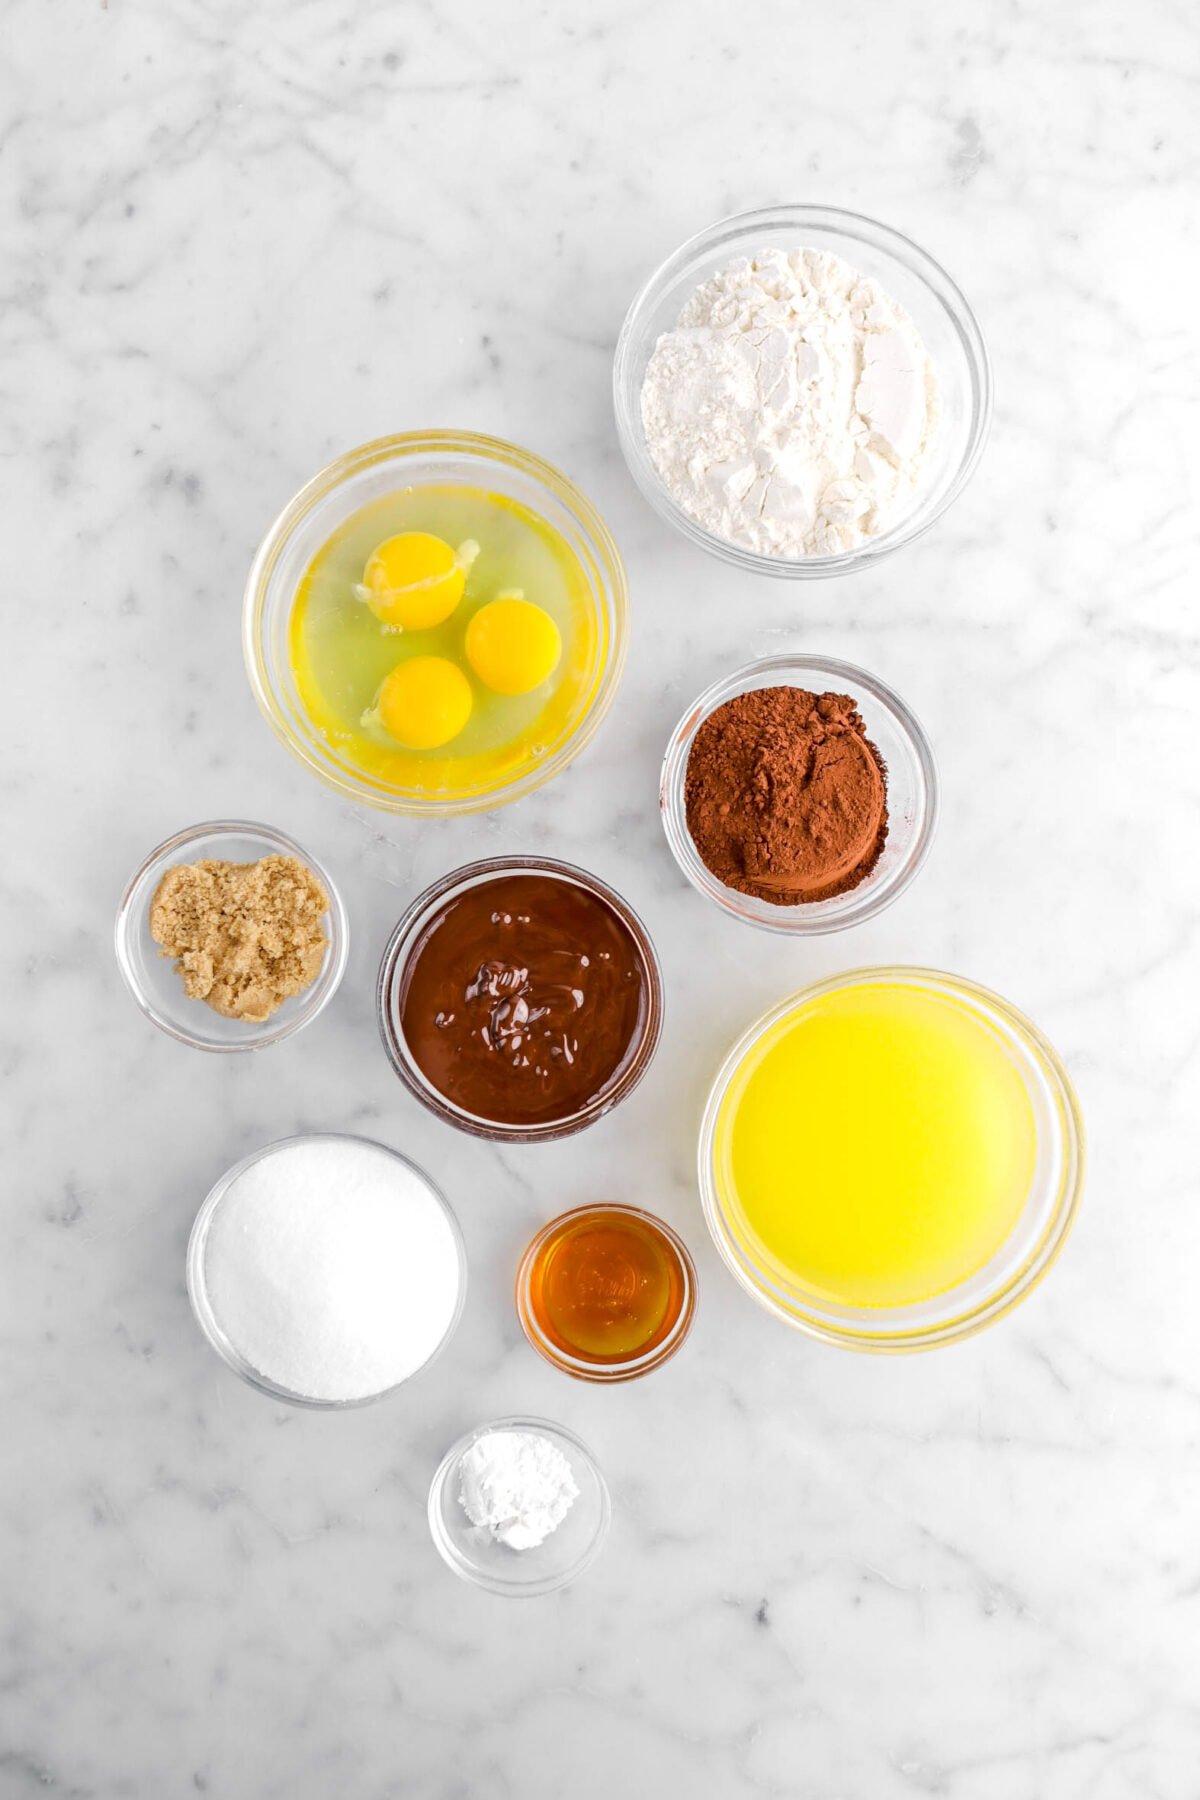 flour, eggs, cocoa powder, melted chocolate, brown sugar, granulated sugar, melted butter, honey, and baking powder in glass bowls on marble surface.